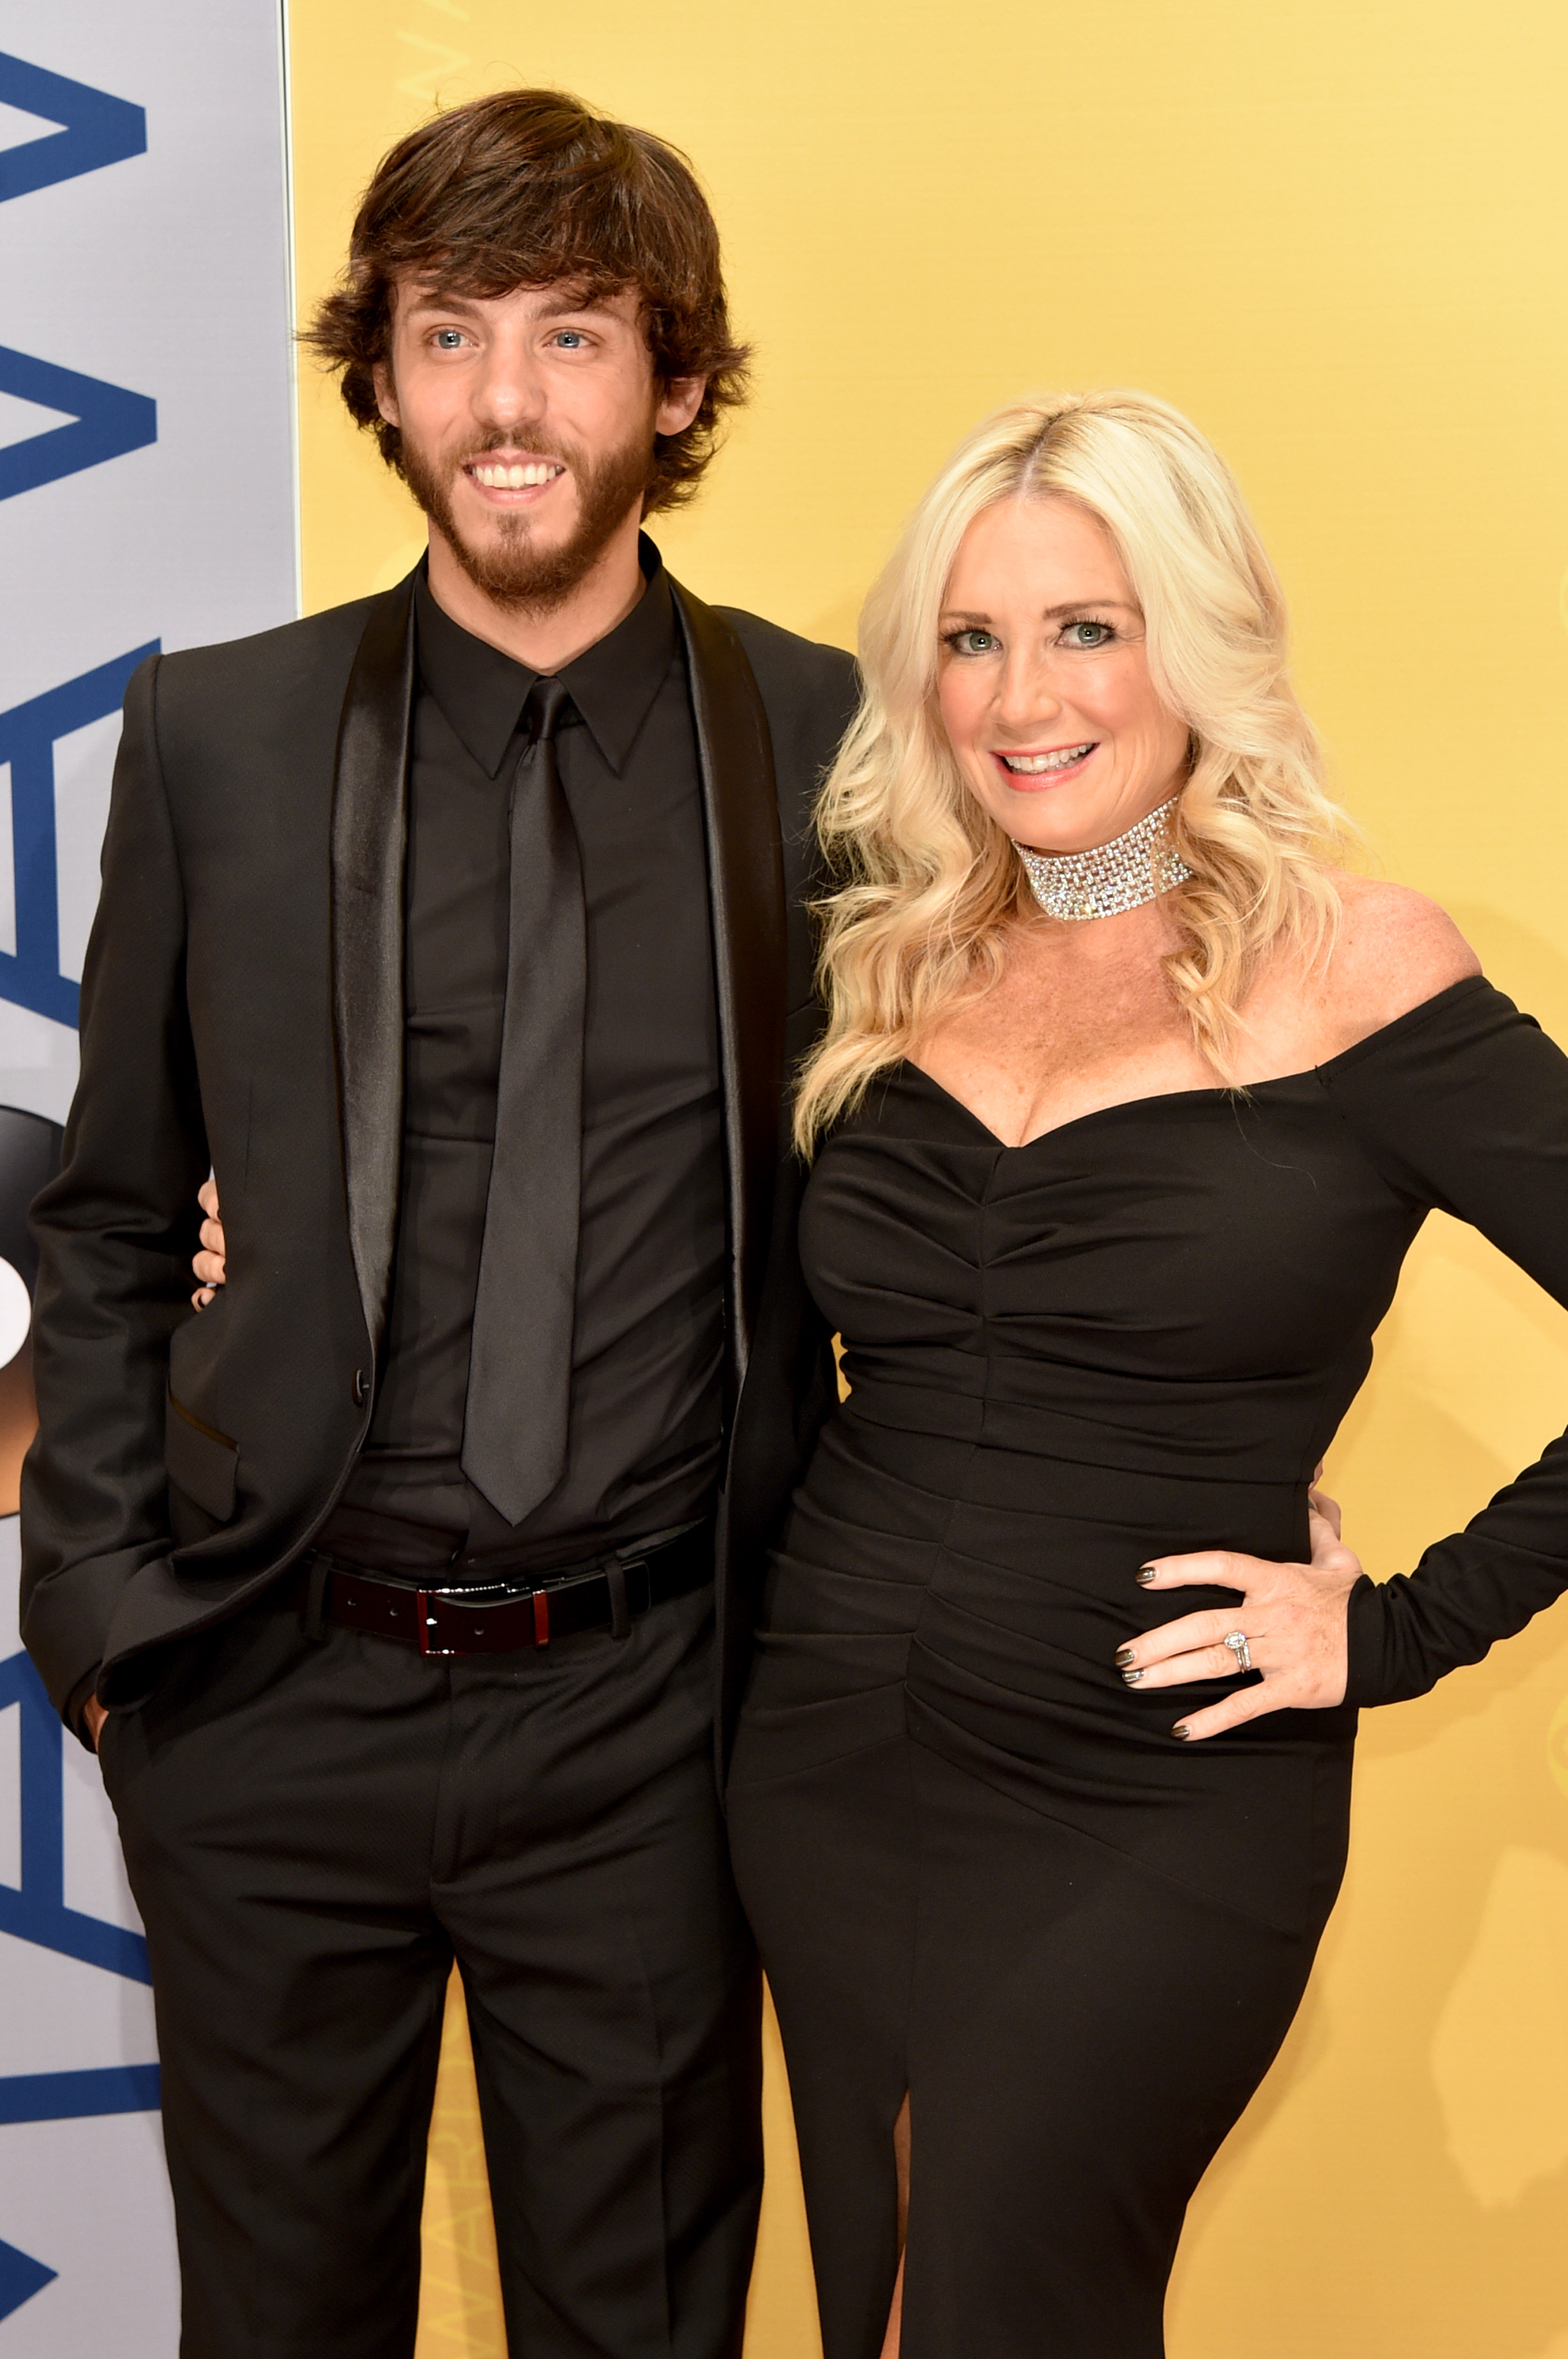 Chris Janson and wife Kelly Lynn at the 50th annual CMA Awards in 2016, in Nashville, Tennessee. | Source: Getty Images